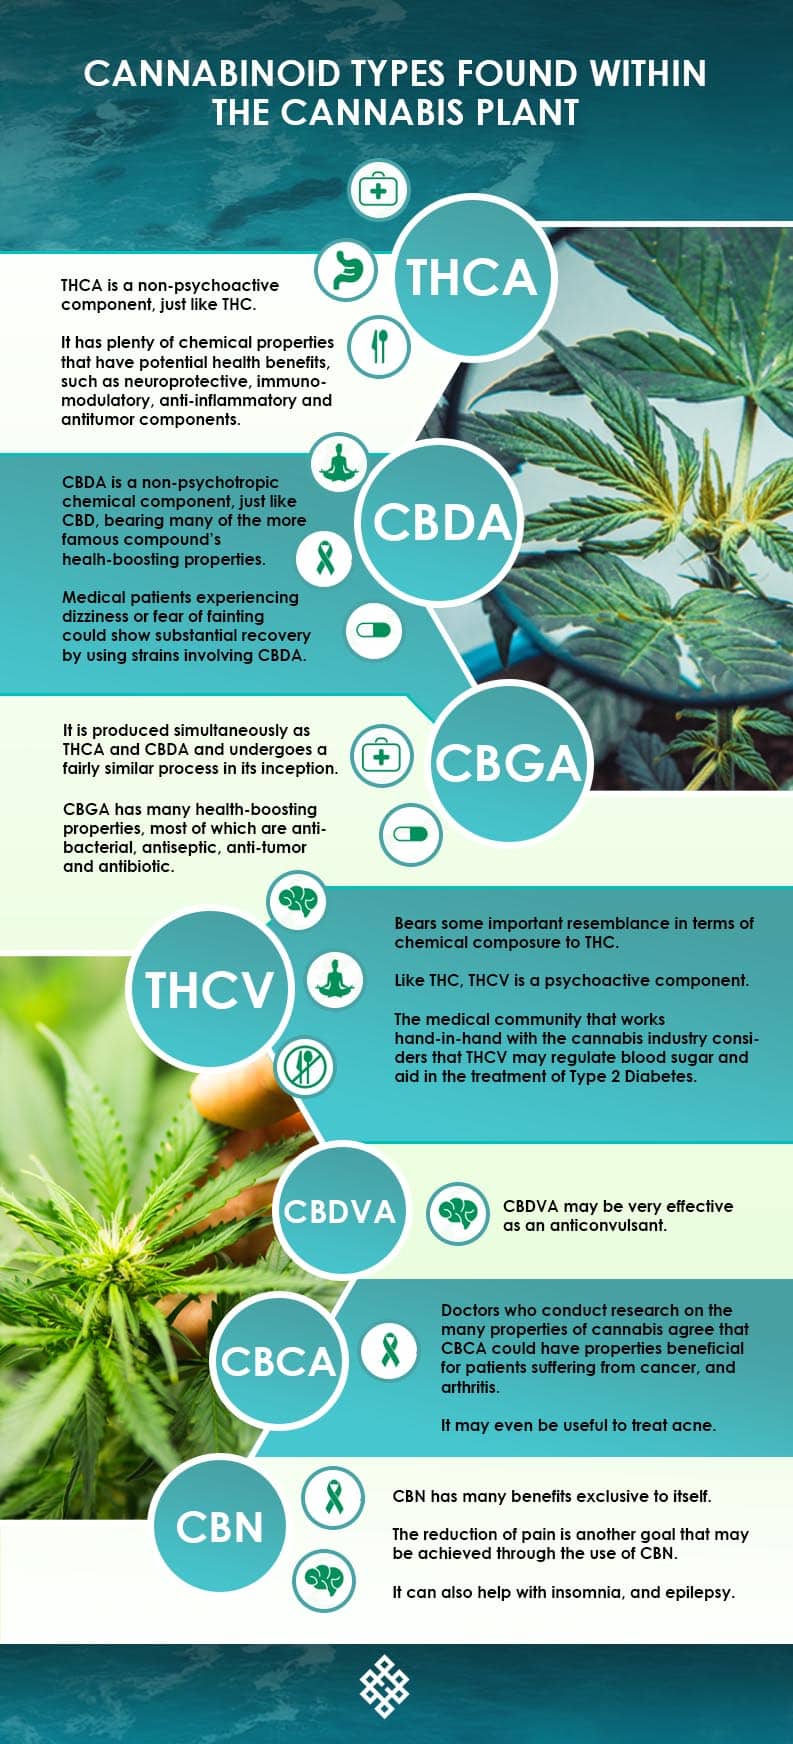 Cannabinoids, Are There More Cannabinoids Than THC and CBD?